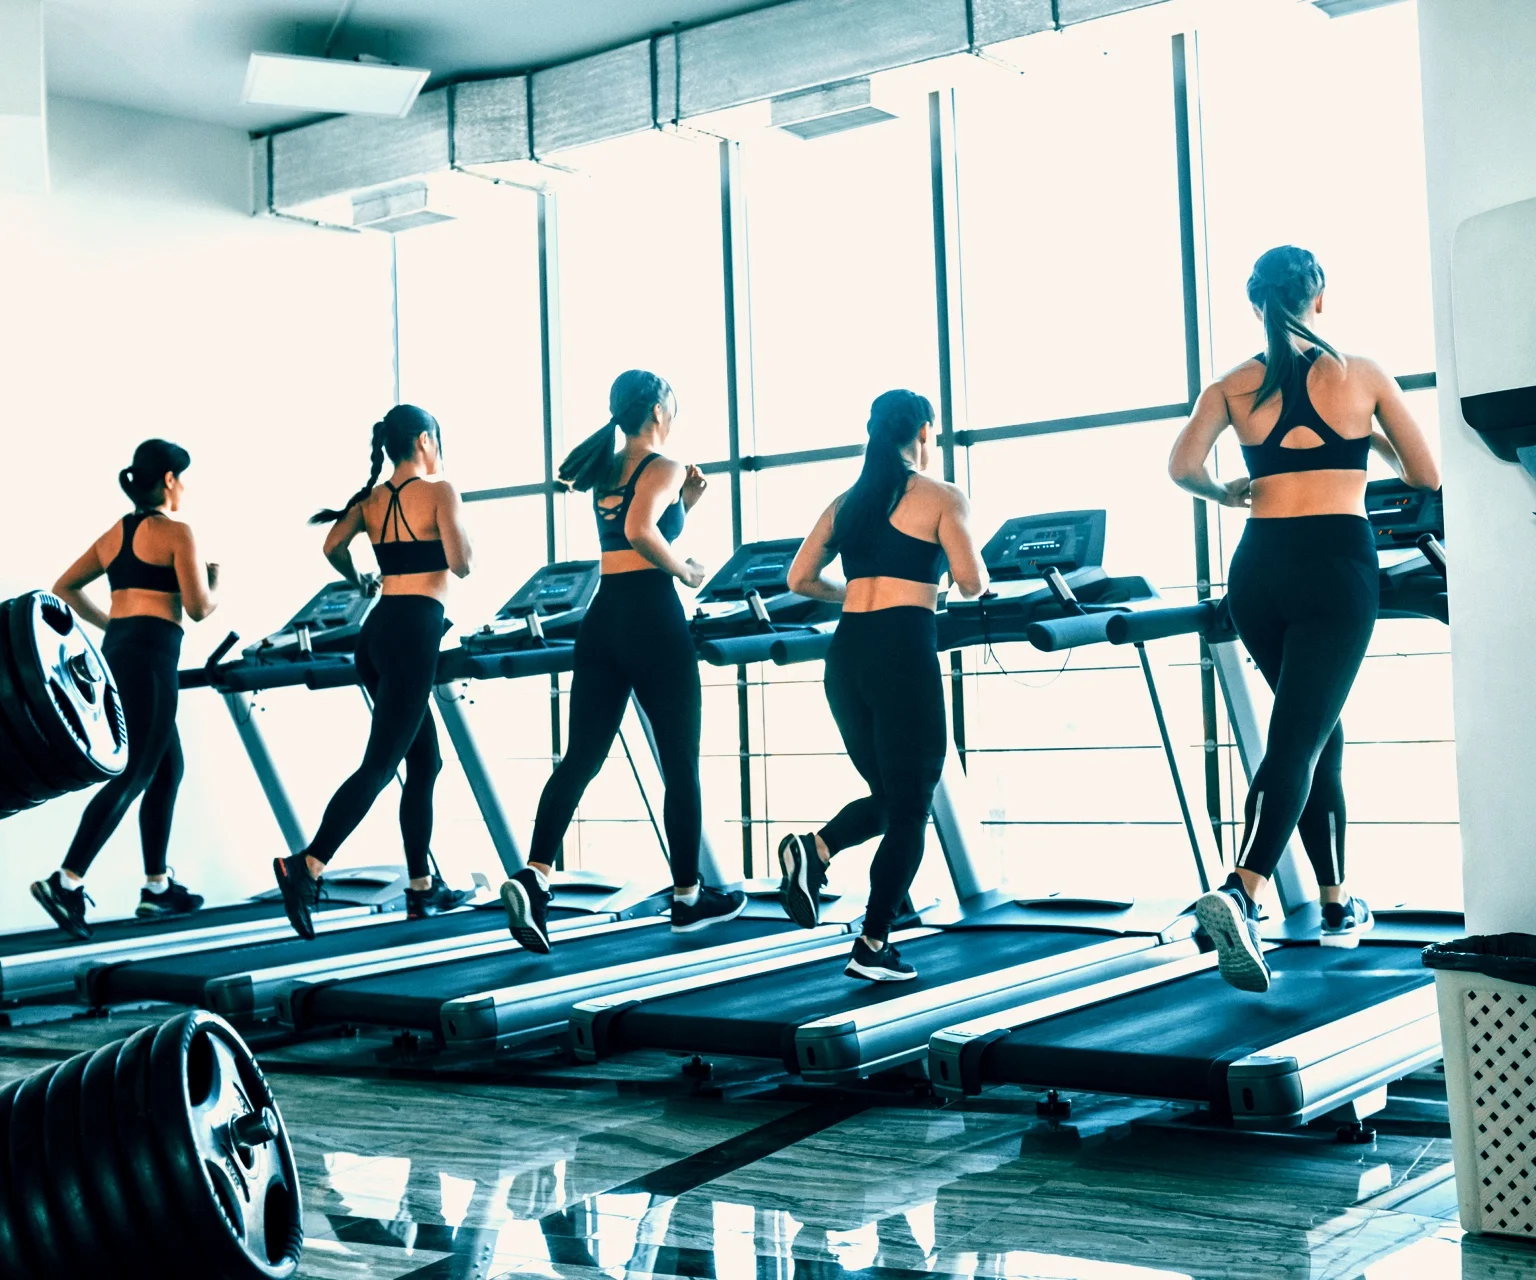 photo - Women run on treadmills at the gym. Running is a good cardio exercise for losing weight.